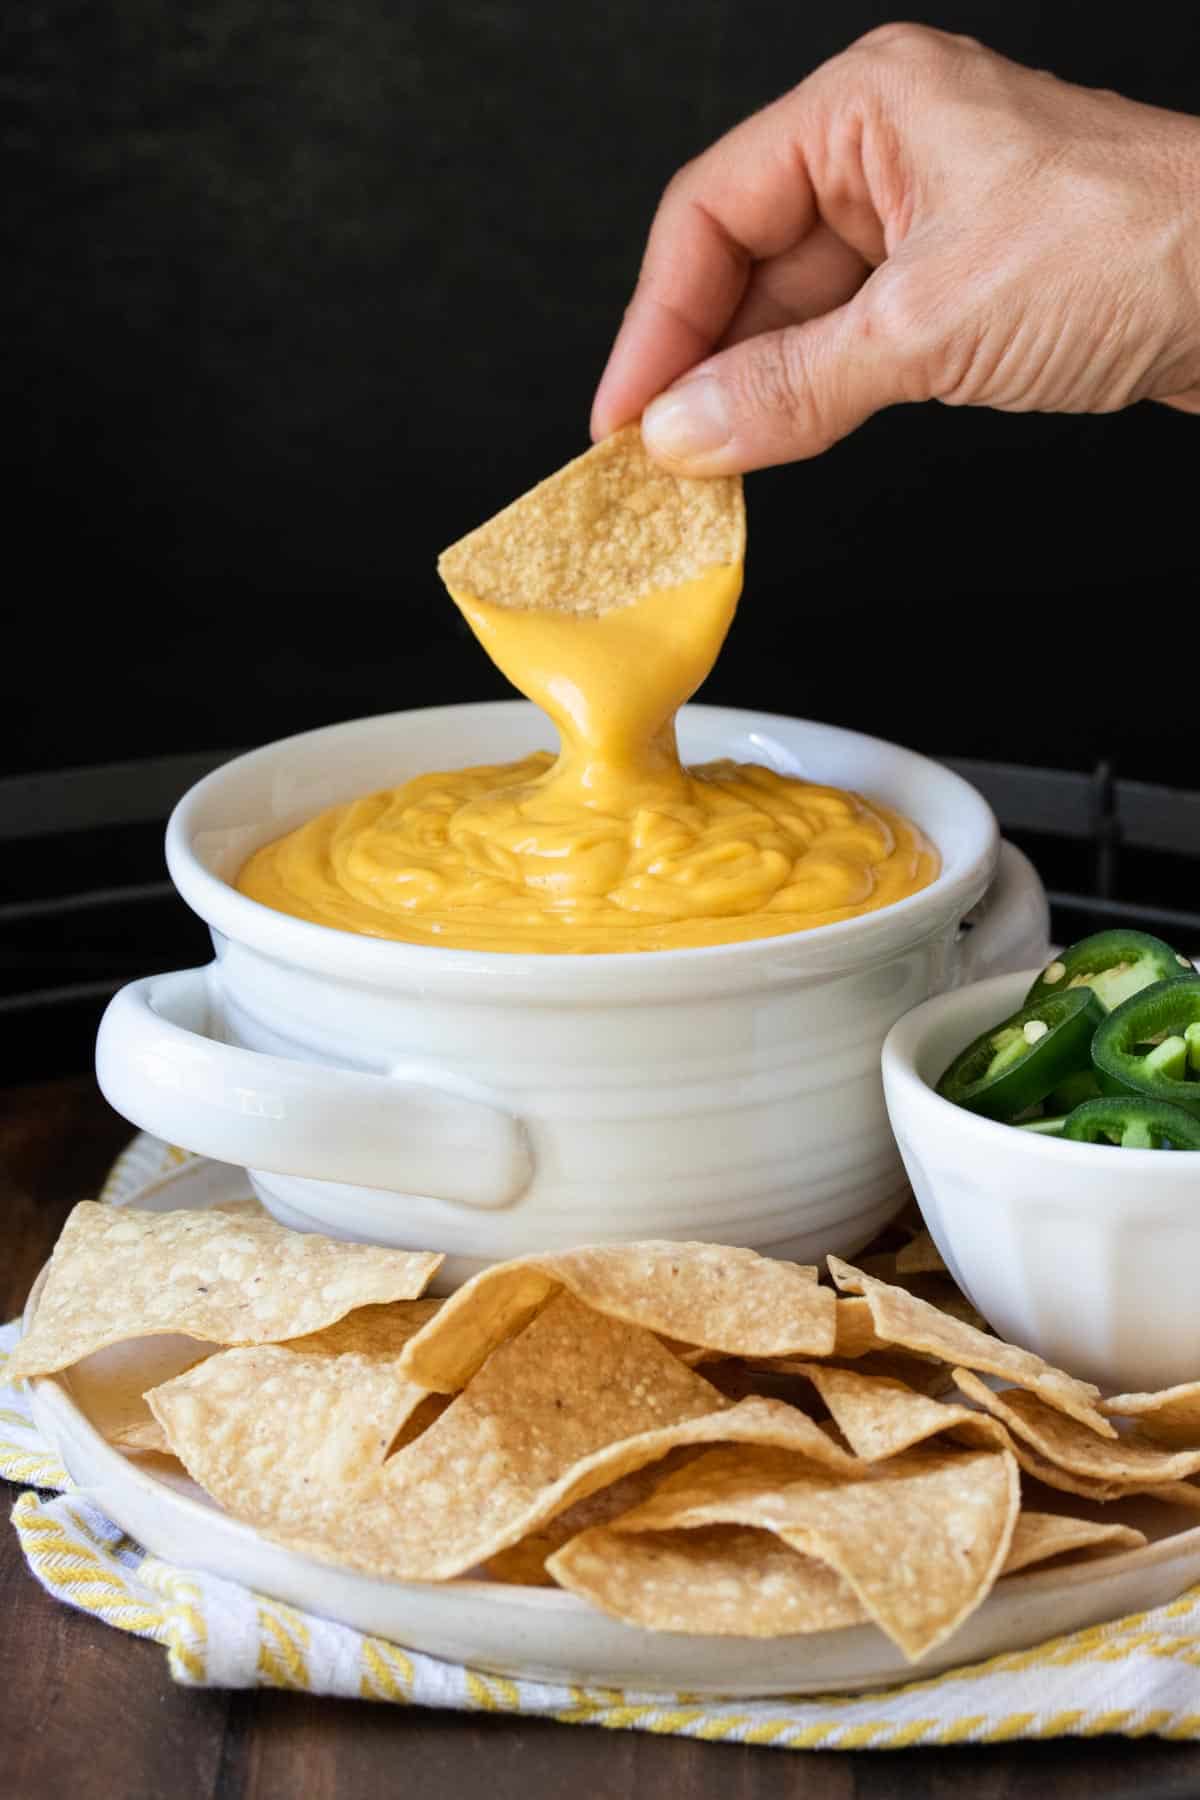 Hand dipping a chip in a bowl of orange cheese sauce